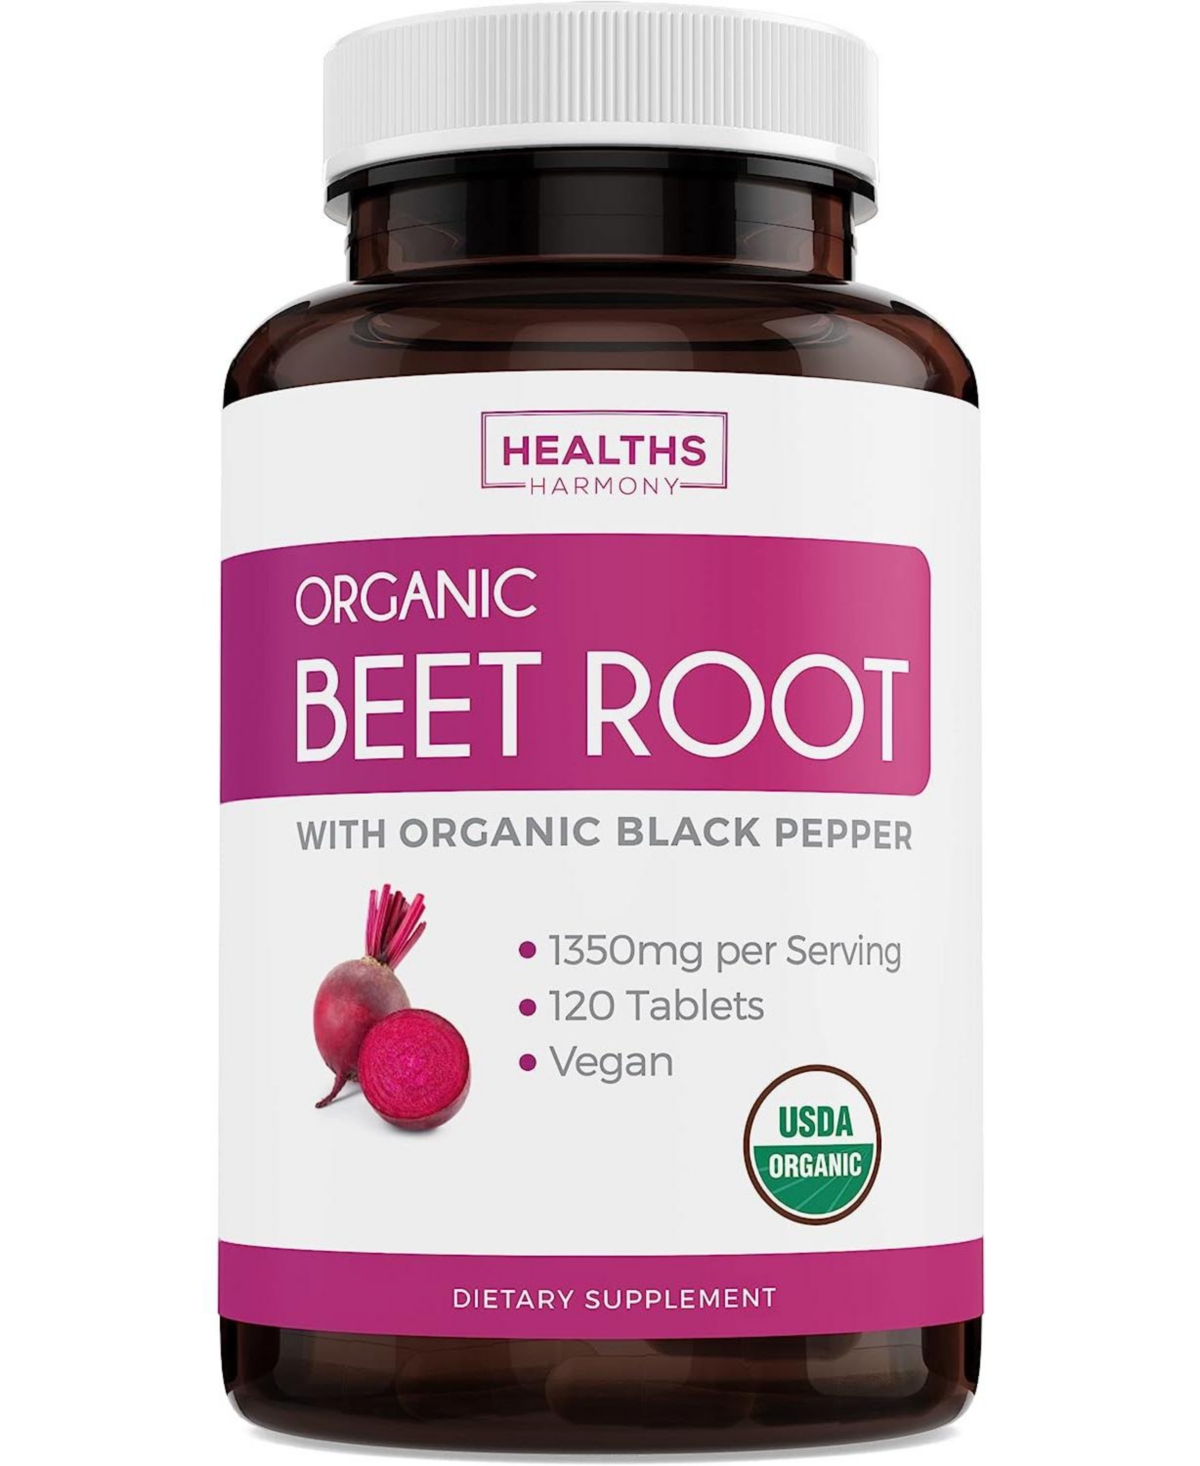 Usda Organic Beet Root Powder 1350mg Beets Per Serving with Black Pepper for Extra Absorption - Super Antioxidant and Nitrate Supplement for Athletic